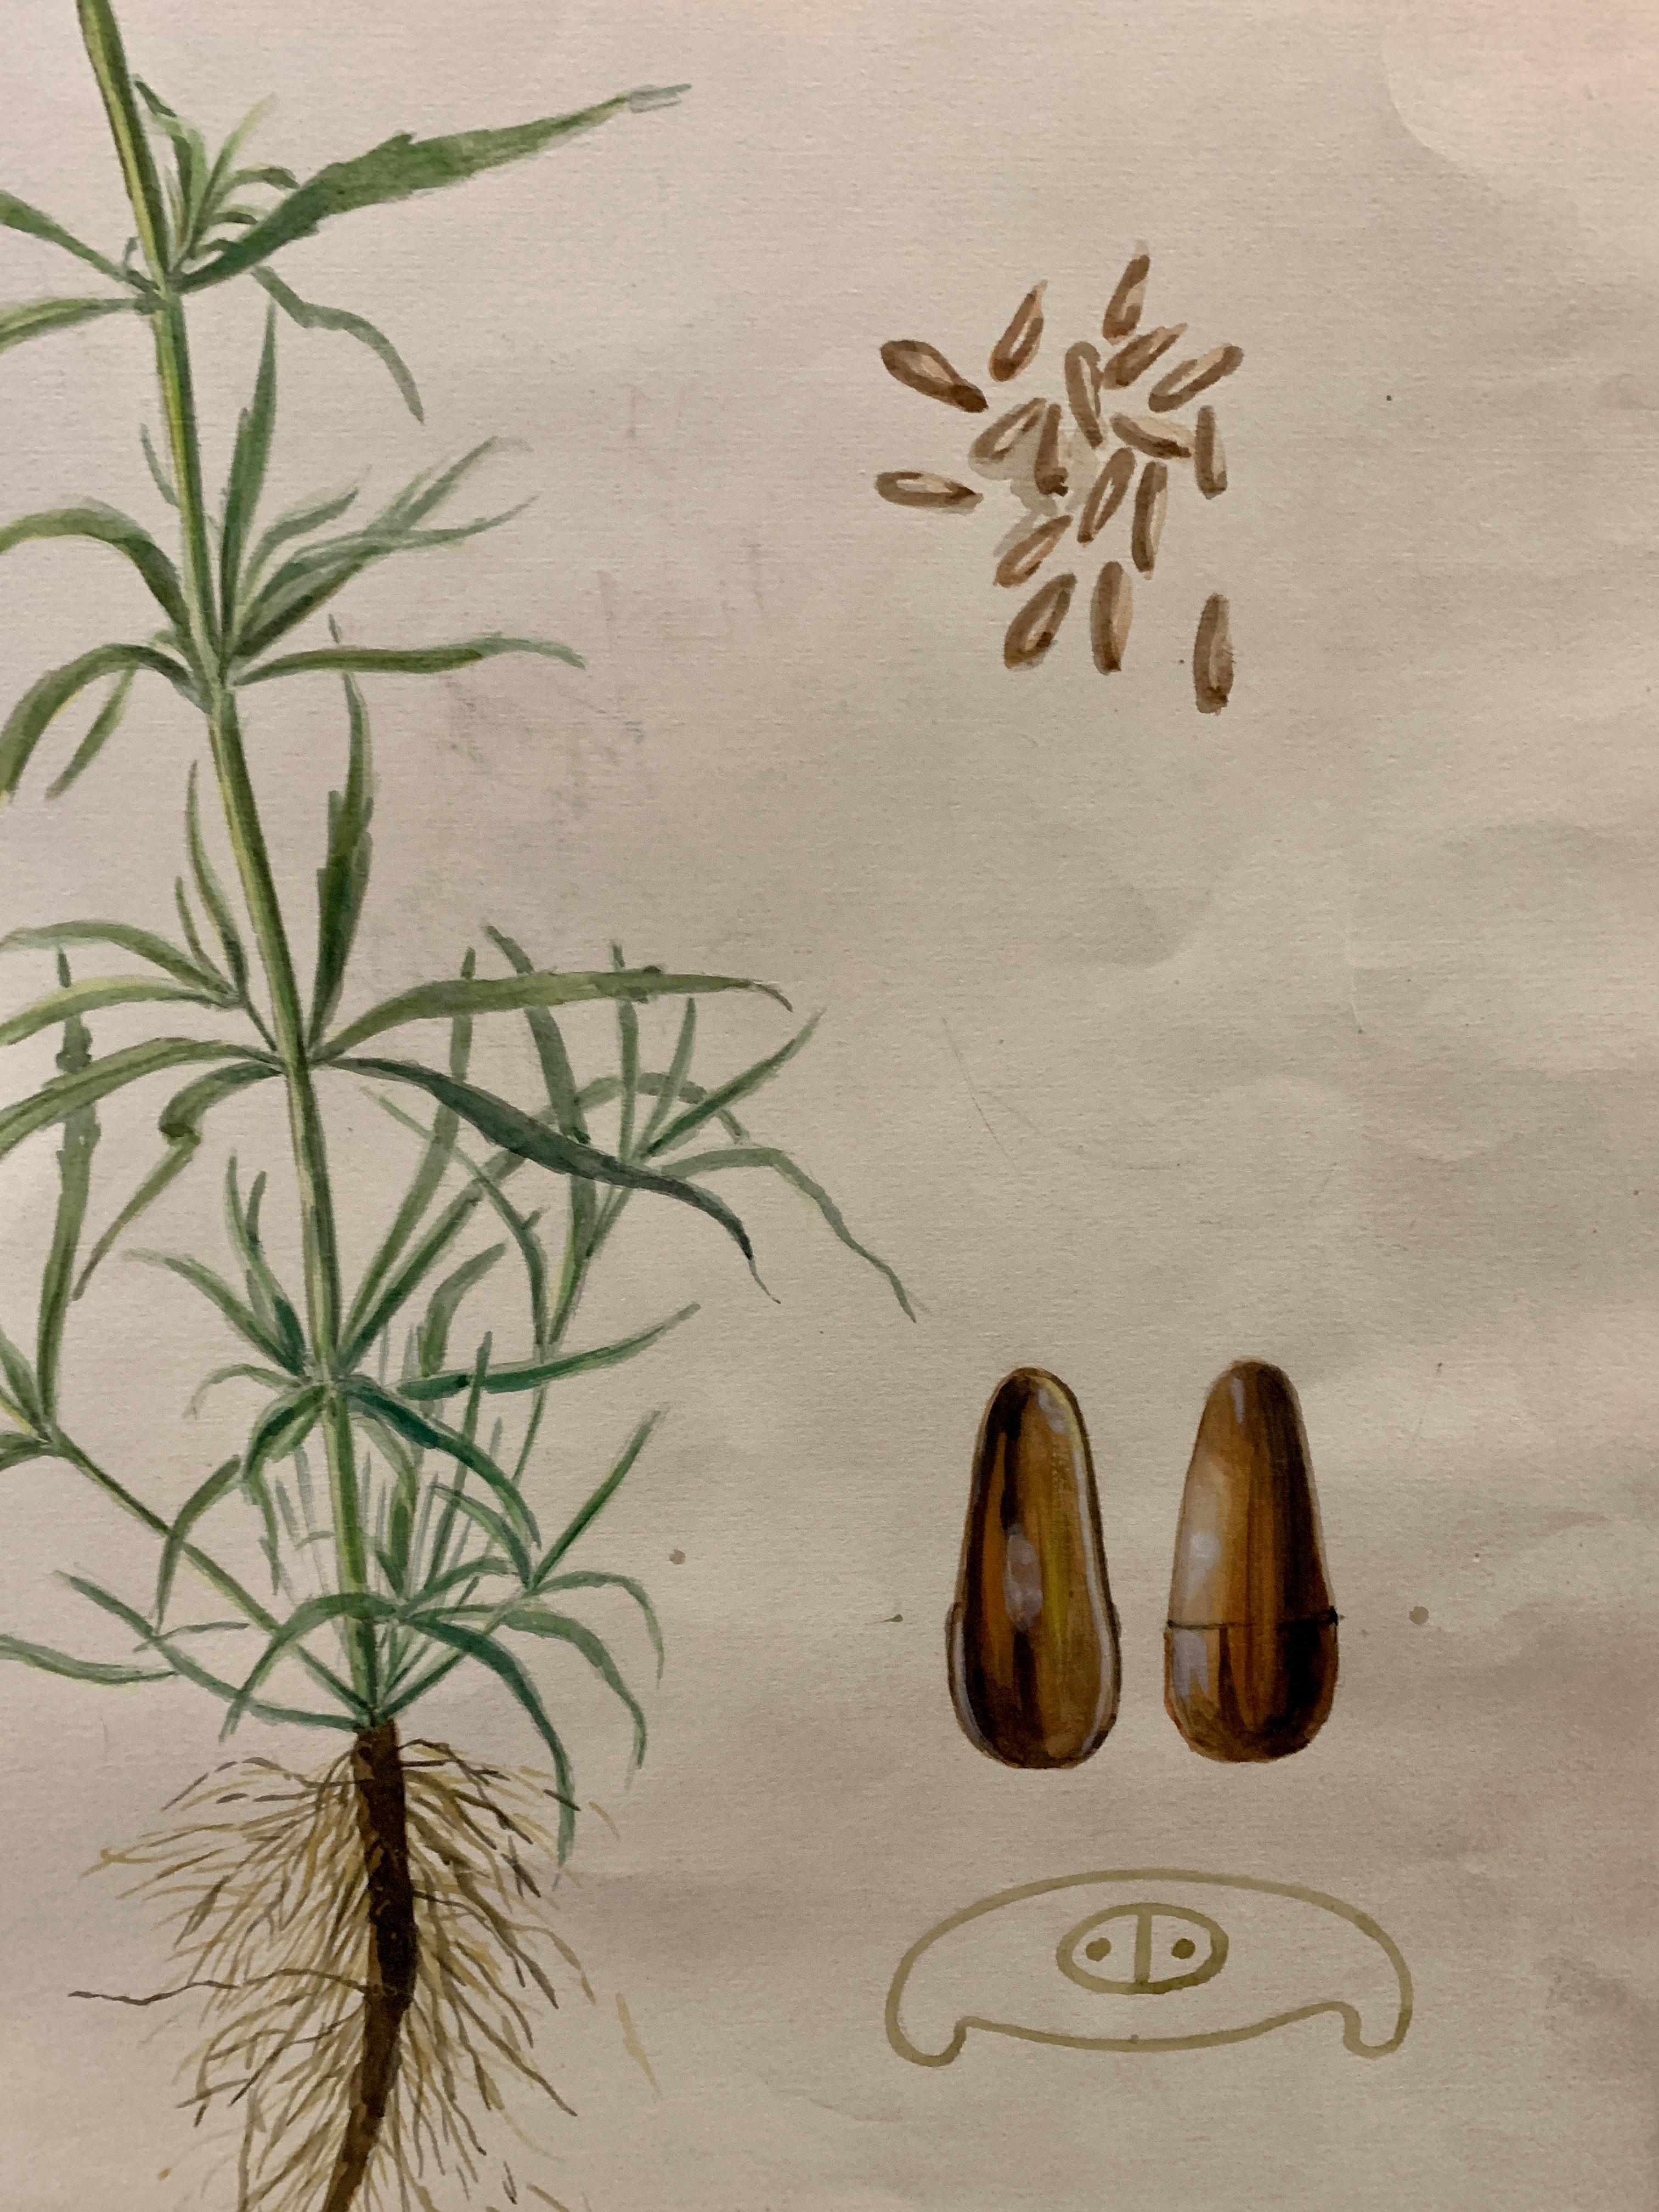 Wonderful watercolor depicting a plant/flower. These were used at a Belgium University to teach the students about botany. Dating from the early 20th century. They are watercolor on think canvas edged paper.

The style of the script is between Art